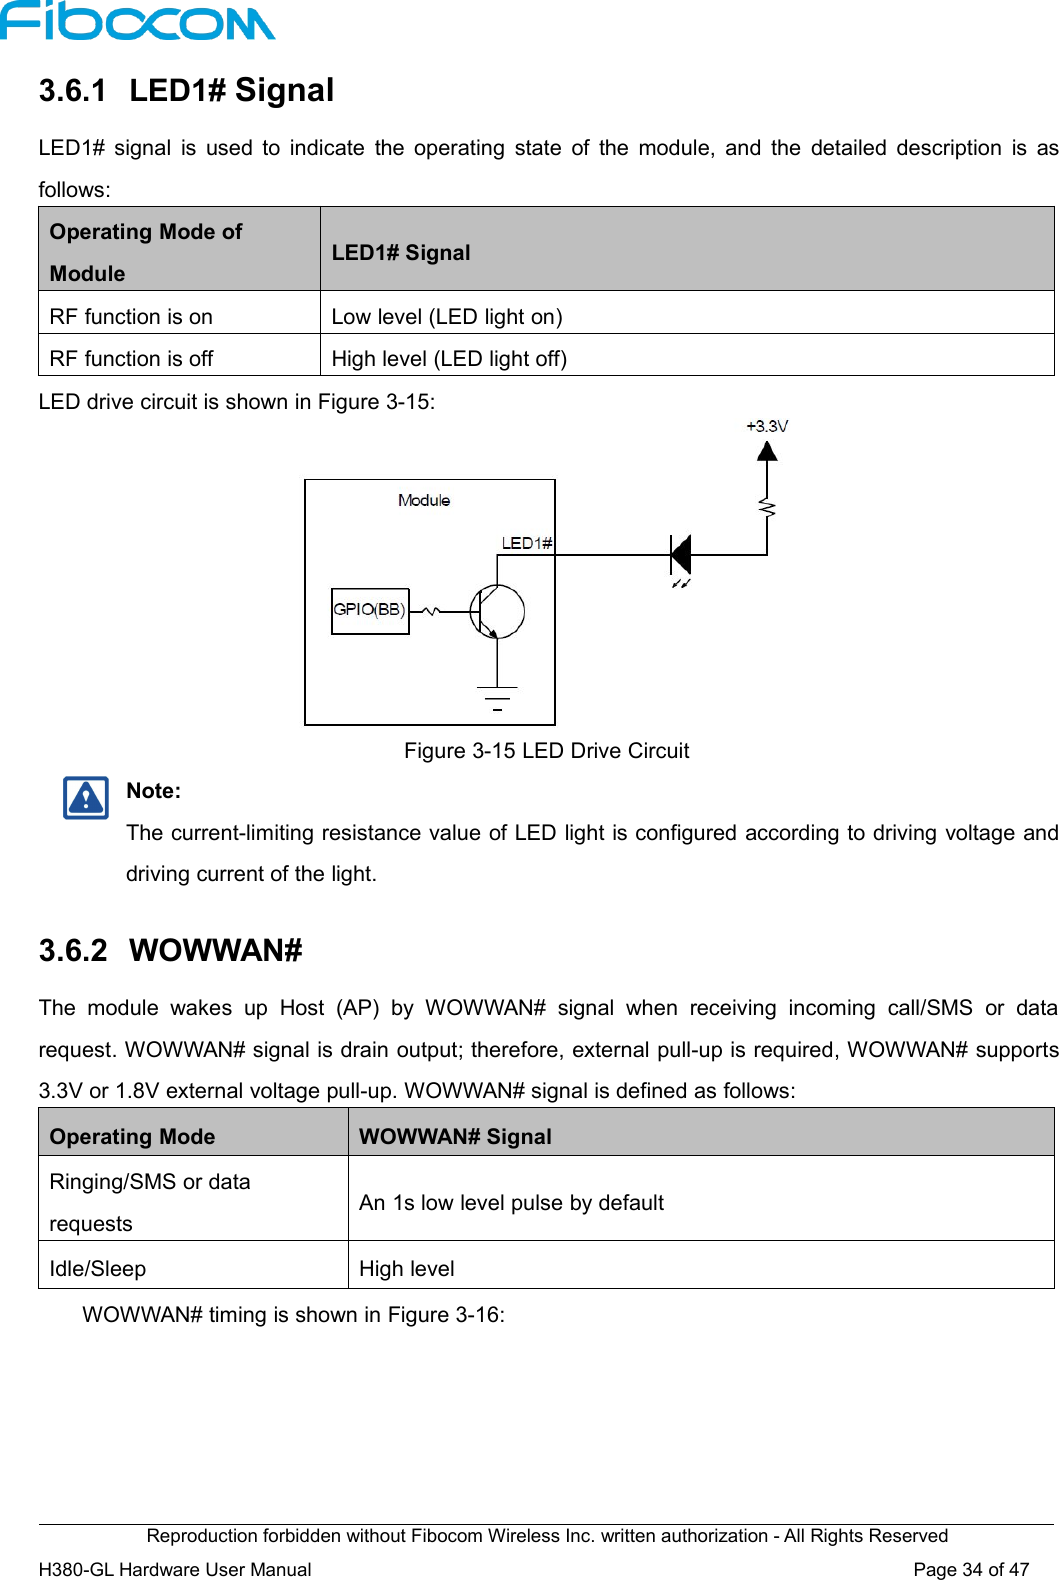 Reproduction forbidden without Fibocom Wireless Inc. written authorization - All Rights ReservedH380-GL Hardware User Manual Page34of473.6.1 LED1# SignalLED1# signal is used to indicate the operating state of the module, and the detailed description is asfollows:Operating Mode ofModuleLED1# SignalRF function is onLow level (LED light on)RF function is offHigh level (LED light off)LED drive circuit is shown in Figure 3-15:Figure 3-15 LED Drive CircuitNote:The current-limiting resistance value of LED light is configured according to driving voltage anddriving current of the light.3.6.2 WOWWAN#The module wakes up Host (AP) by WOWWAN# signal when receiving incoming call/SMS or datarequest. WOWWAN# signal is drain output; therefore, external pull-up is required, WOWWAN# supports3.3V or 1.8V external voltage pull-up. WOWWAN# signal is defined as follows:Operating ModeWOWWAN# SignalRinging/SMS or datarequestsAn 1s low level pulse by defaultIdle/SleepHigh levelWOWWAN# timing is shown in Figure 3-16: